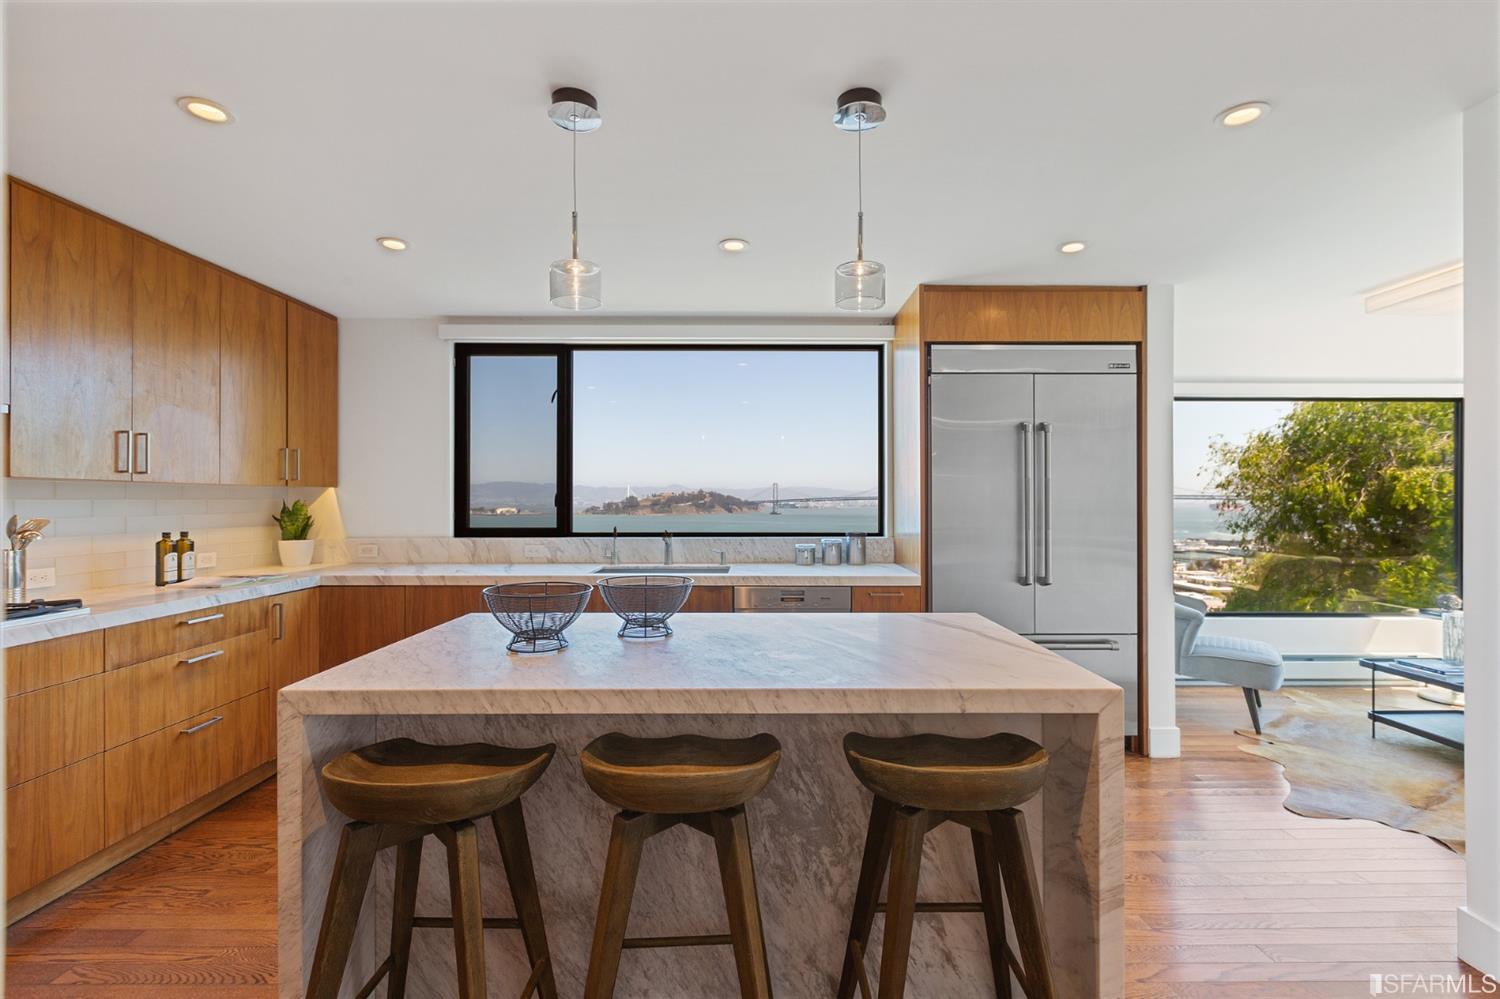 Welcome to 1400 Montgomery St. This home's designer finishes and incredible views will truly impress you.